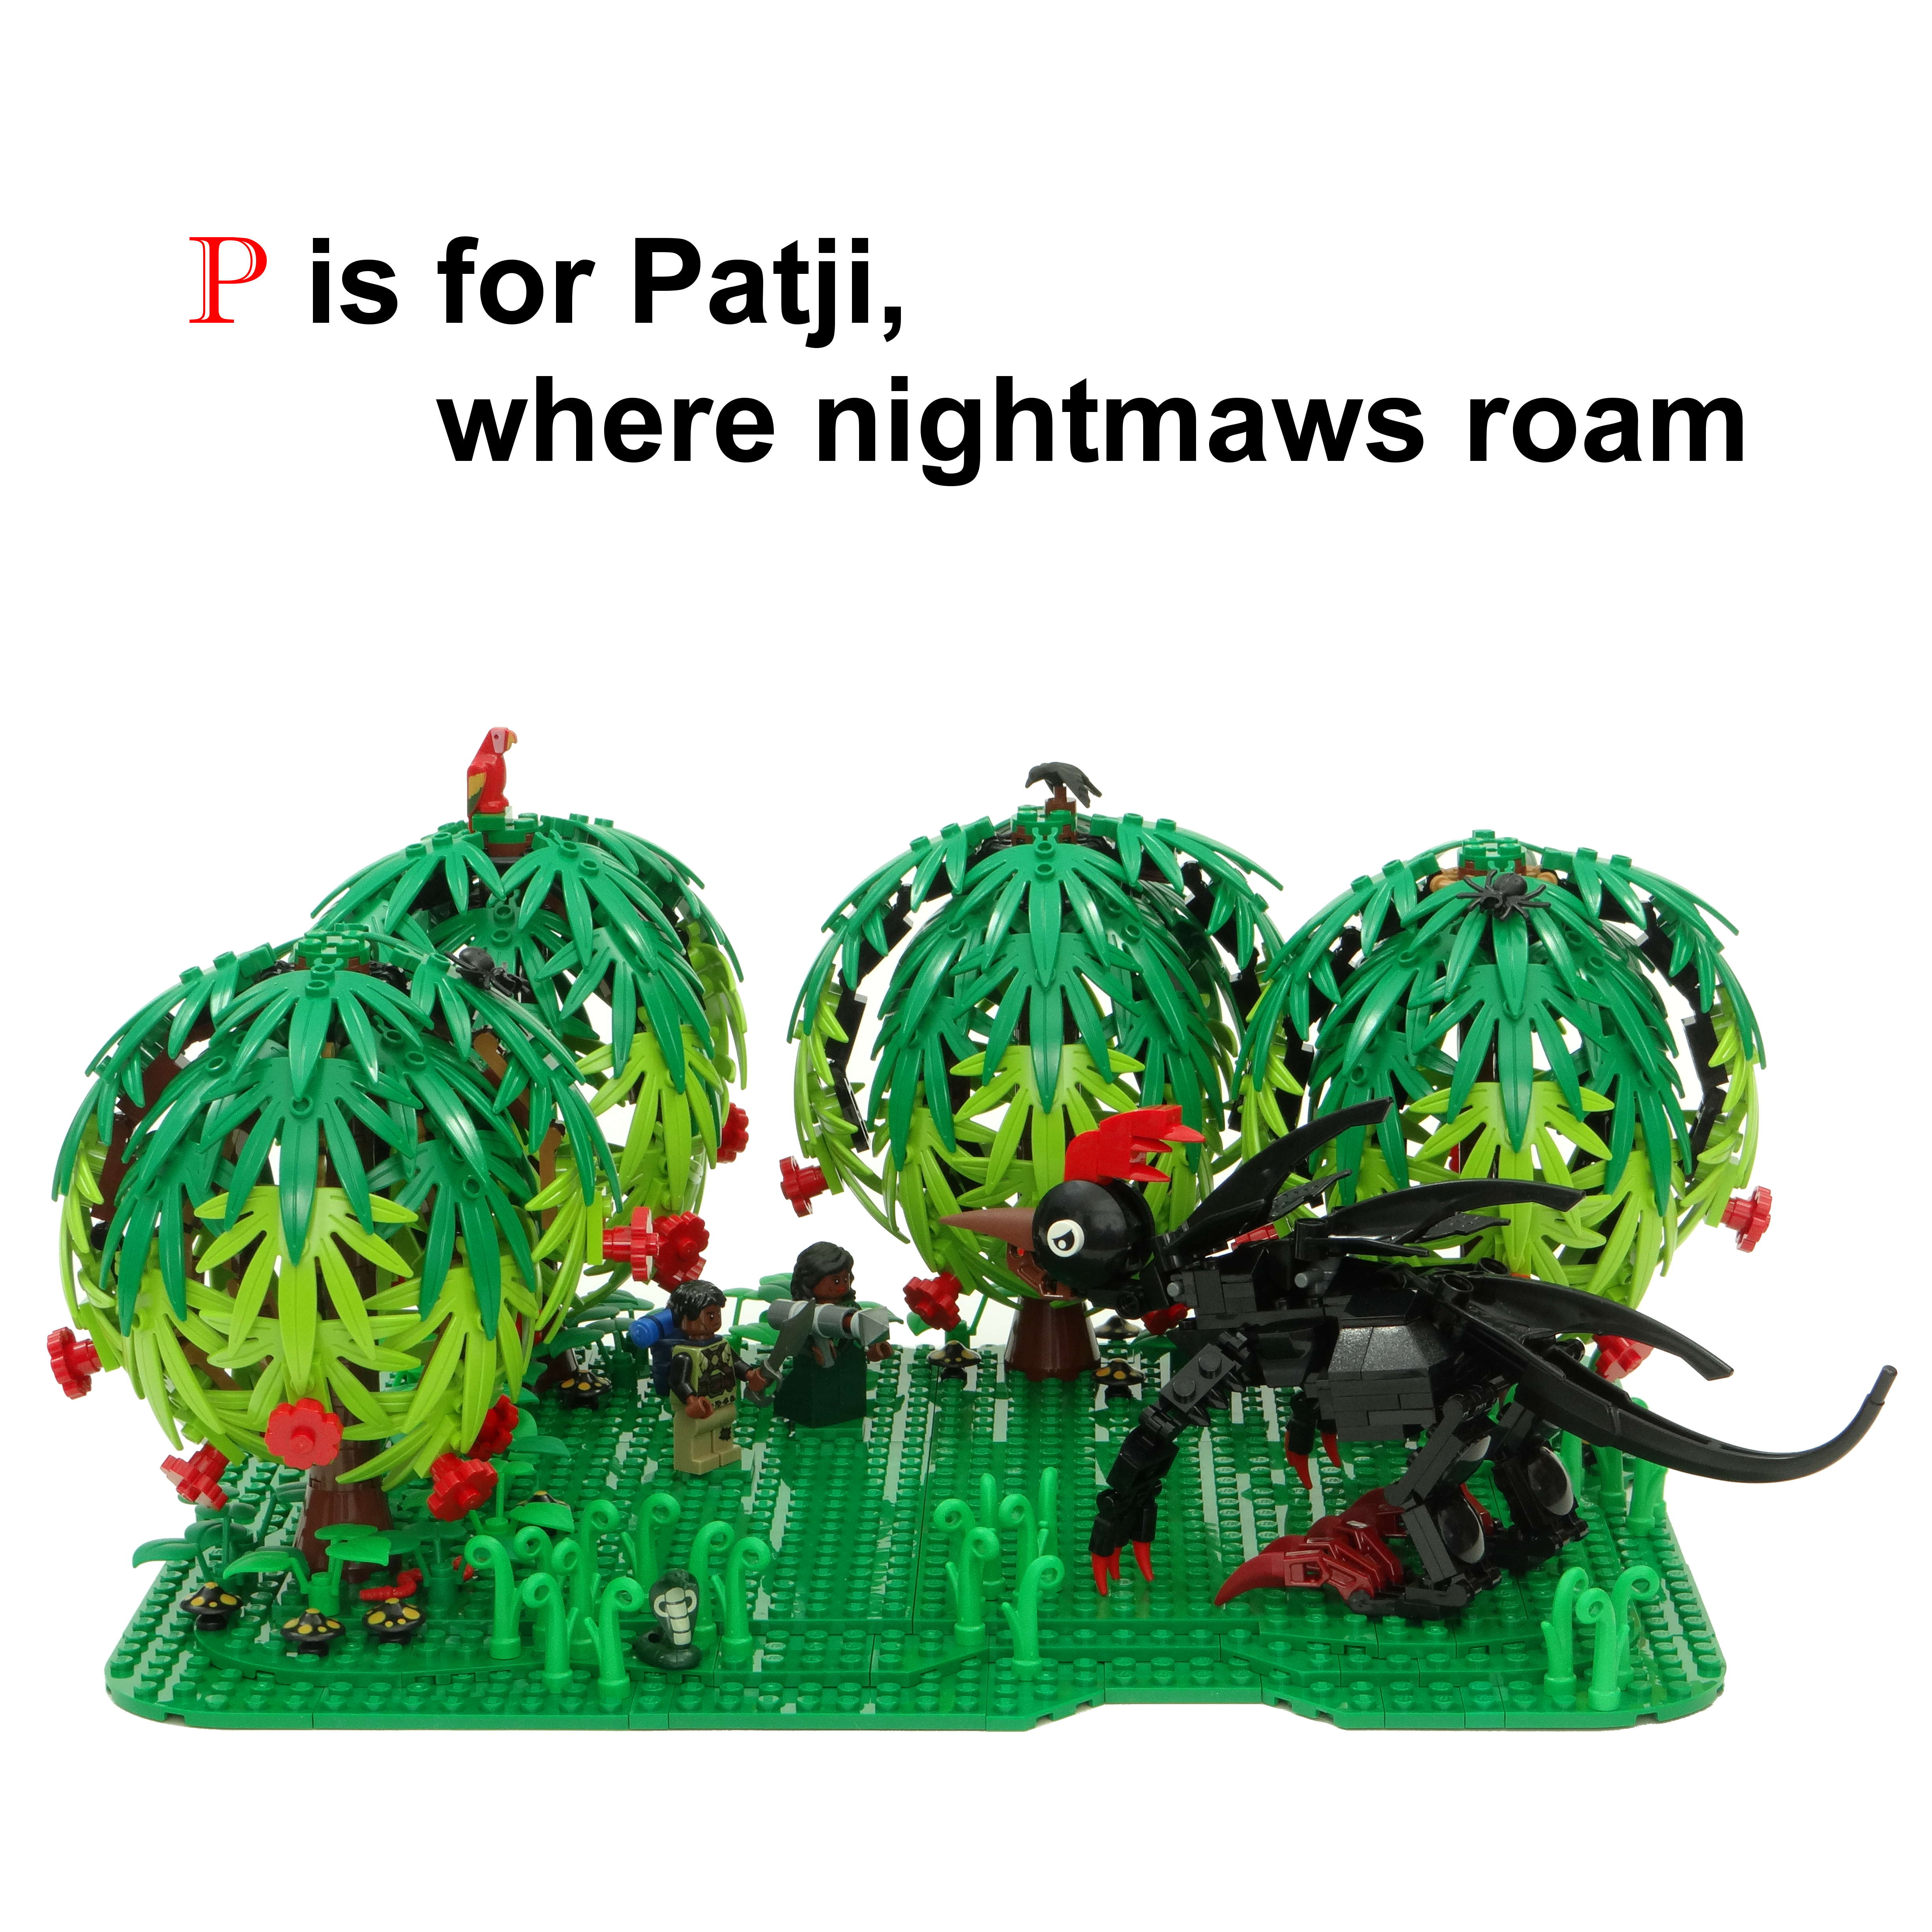 P-is-for-Patji